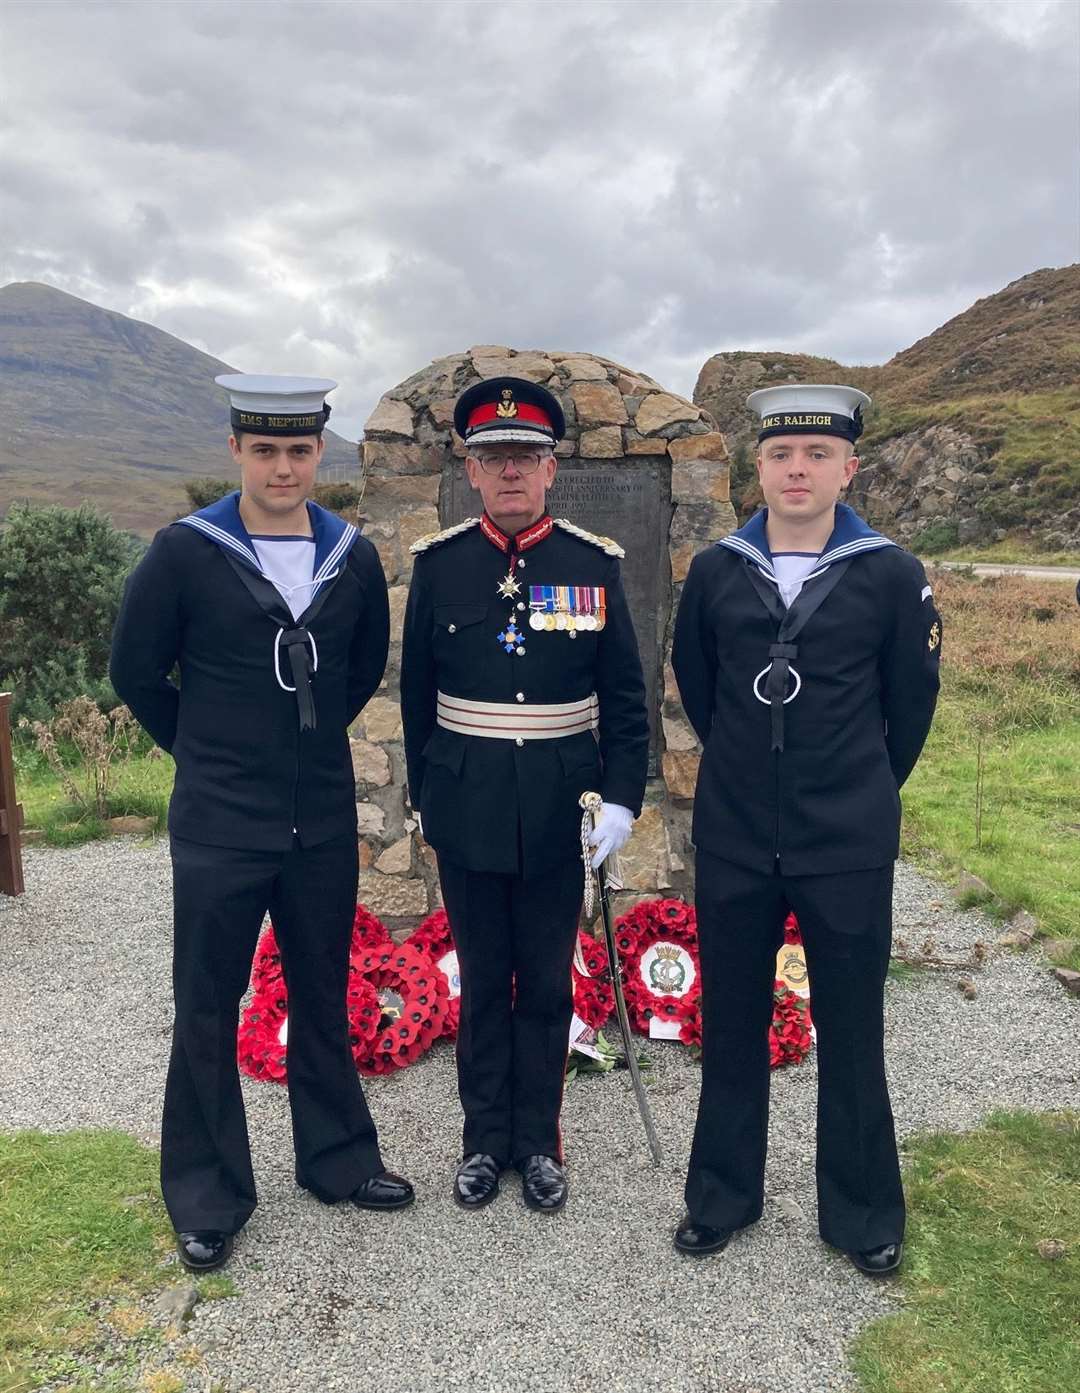 Trainee submariners (Able Seaman Tom Unsworth RN and Leading Hand Oliver Boot RN) attended the service.